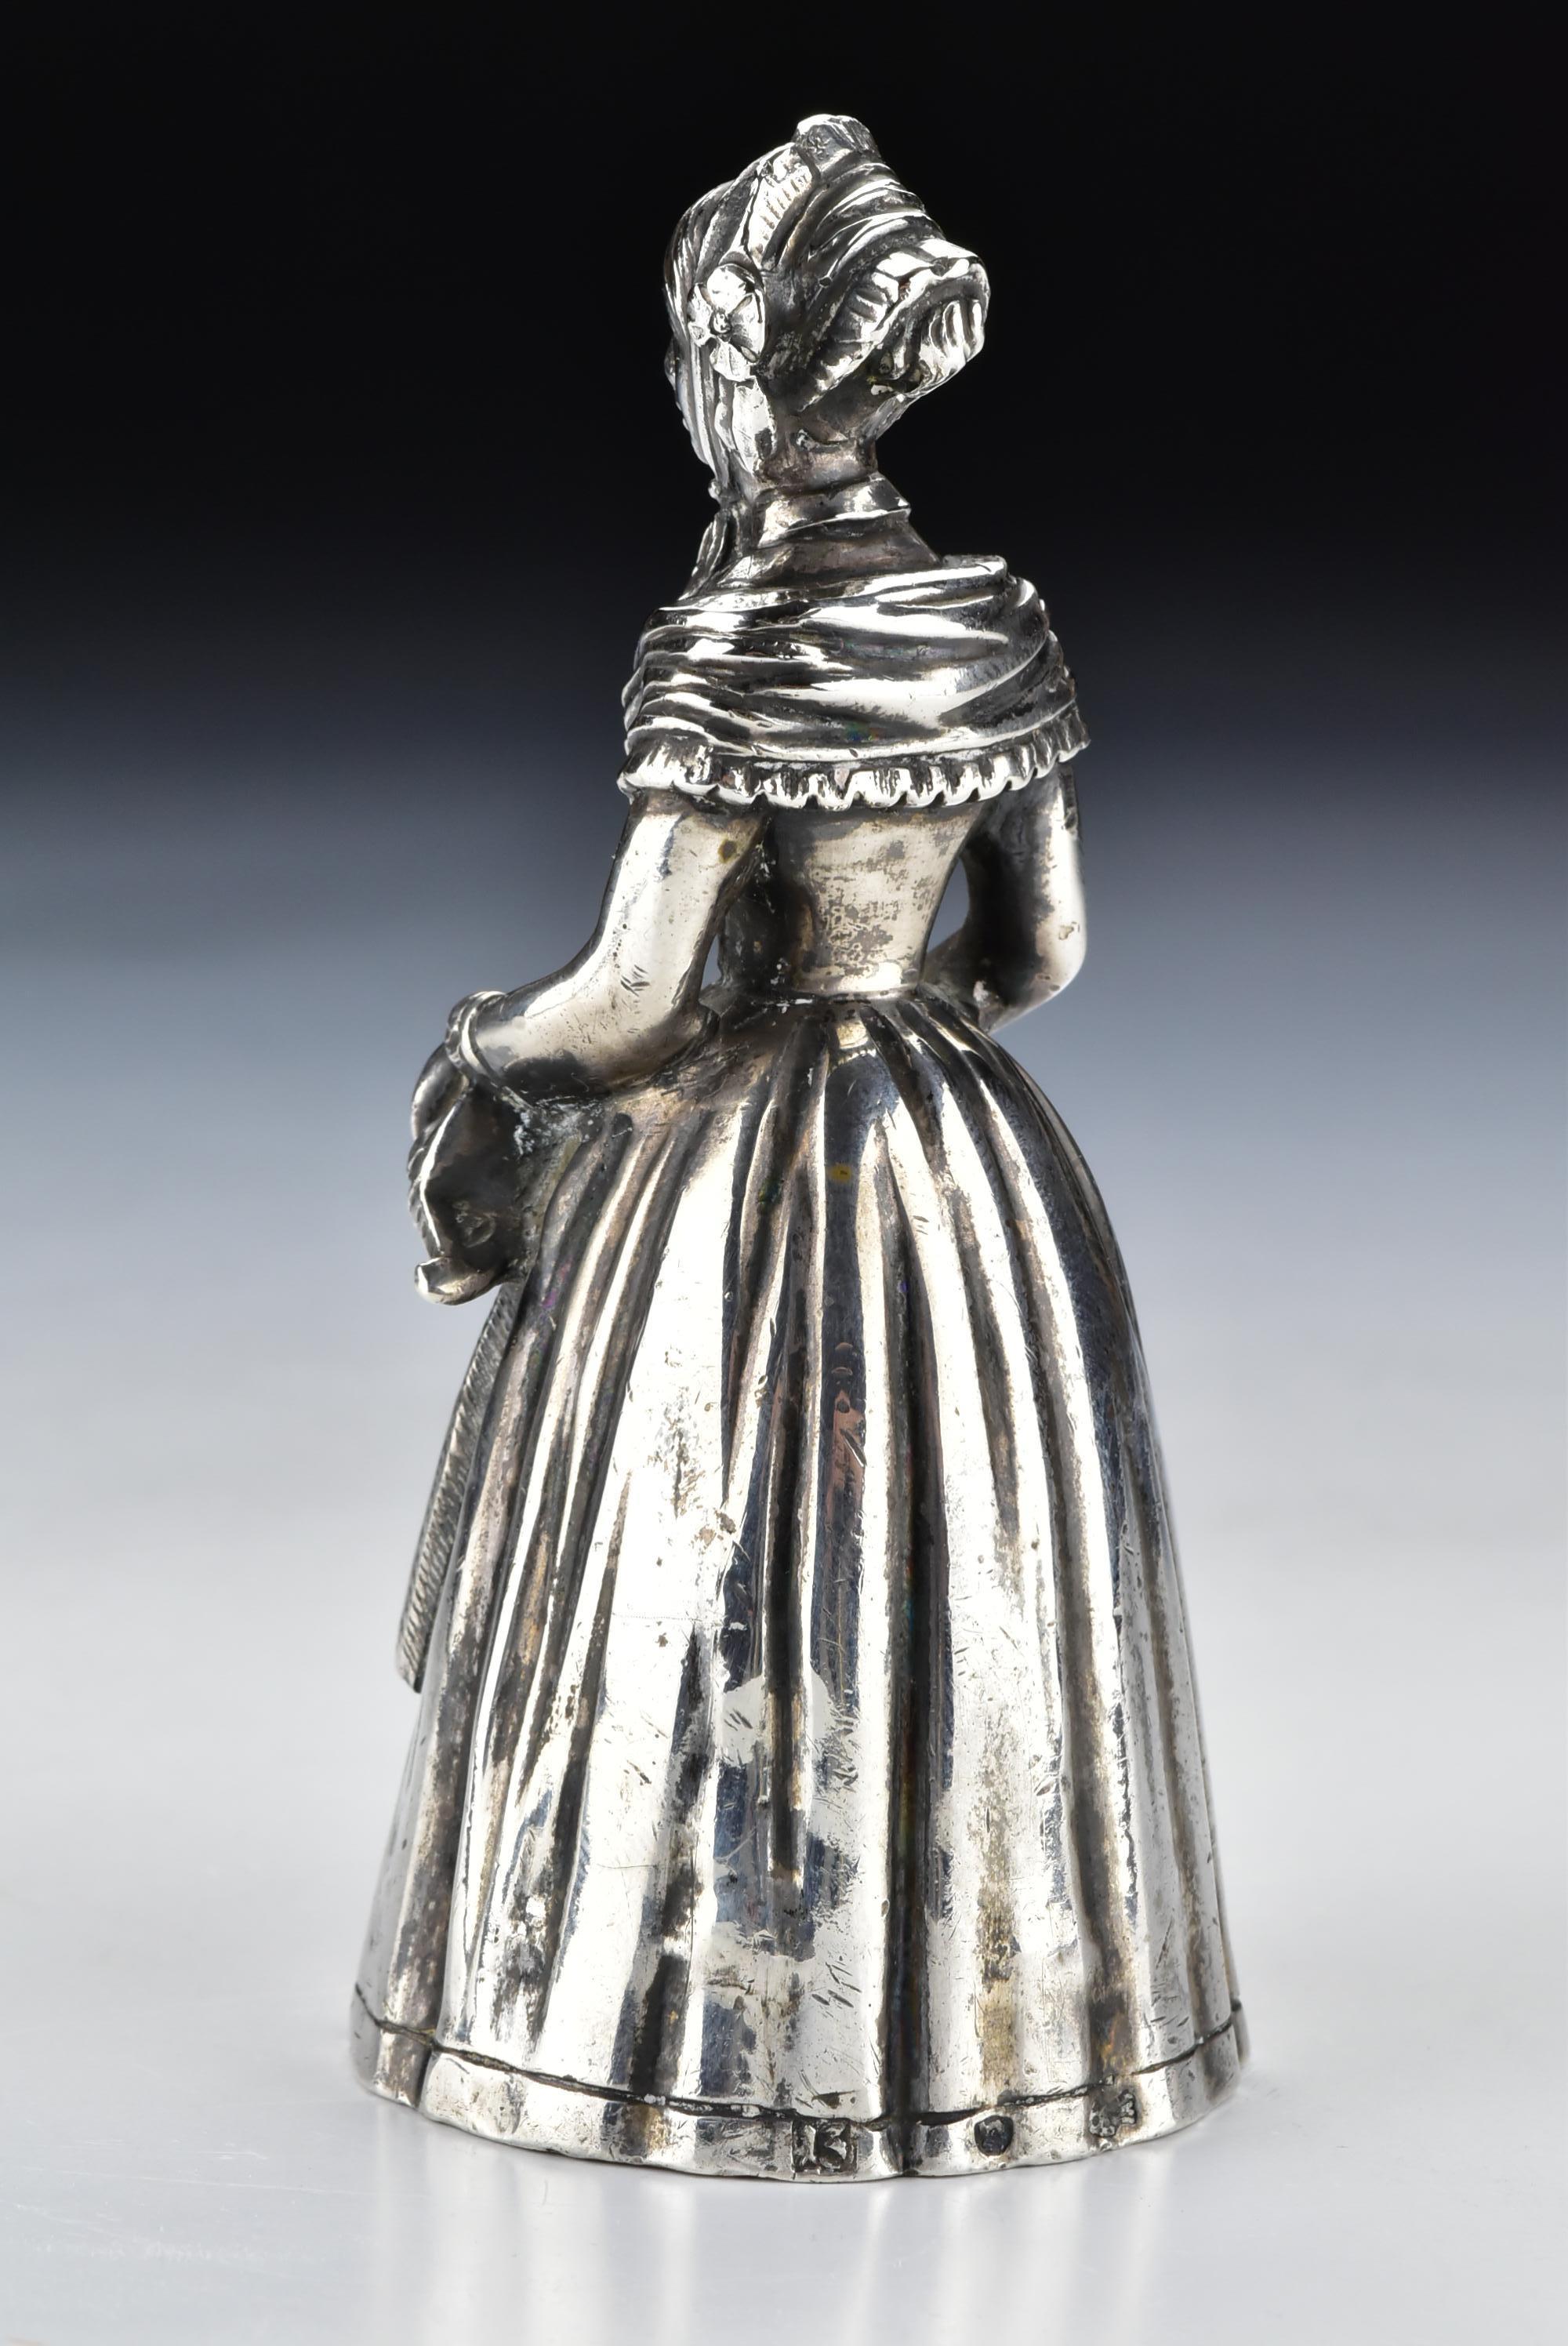 German silver dinner bell in the form of a woman, hallmarked along the bottom edge of her dress. 

Age: Kassel city mark dating from the late 18th century

Size: Approximately 4 + 1/8 inches tall by 2 inches at it's widest point, approximately